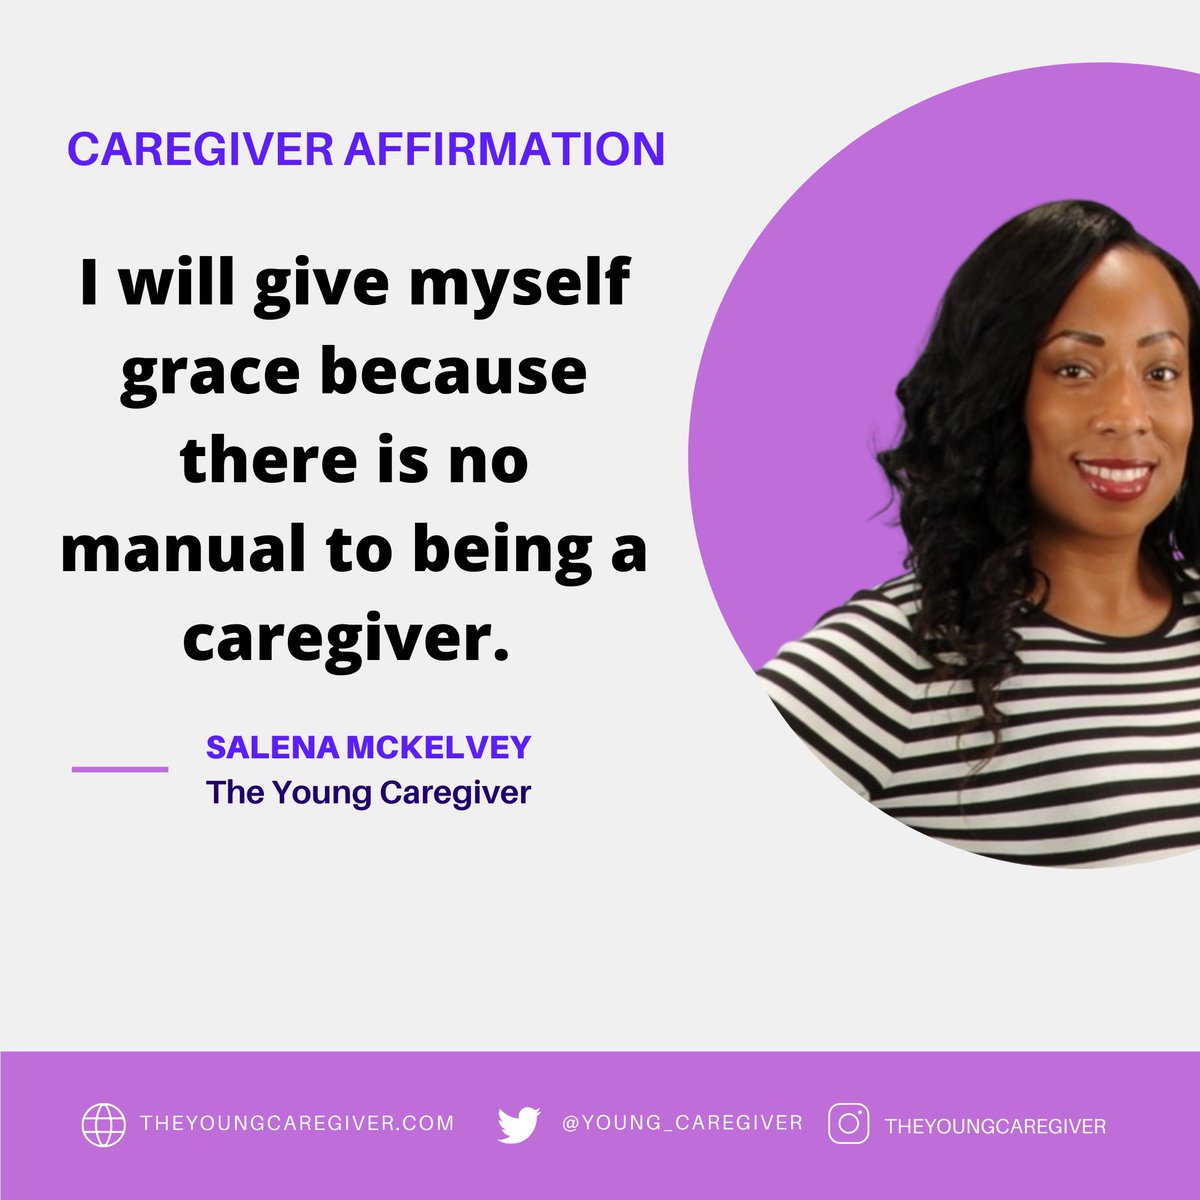 Caregiving is on the job training. Give yourself grace. As your loved ones illness changes your way of caregiving changes. #theyoungcaregiver #caregiver #selflove #selfcare #caregiveraffirmations